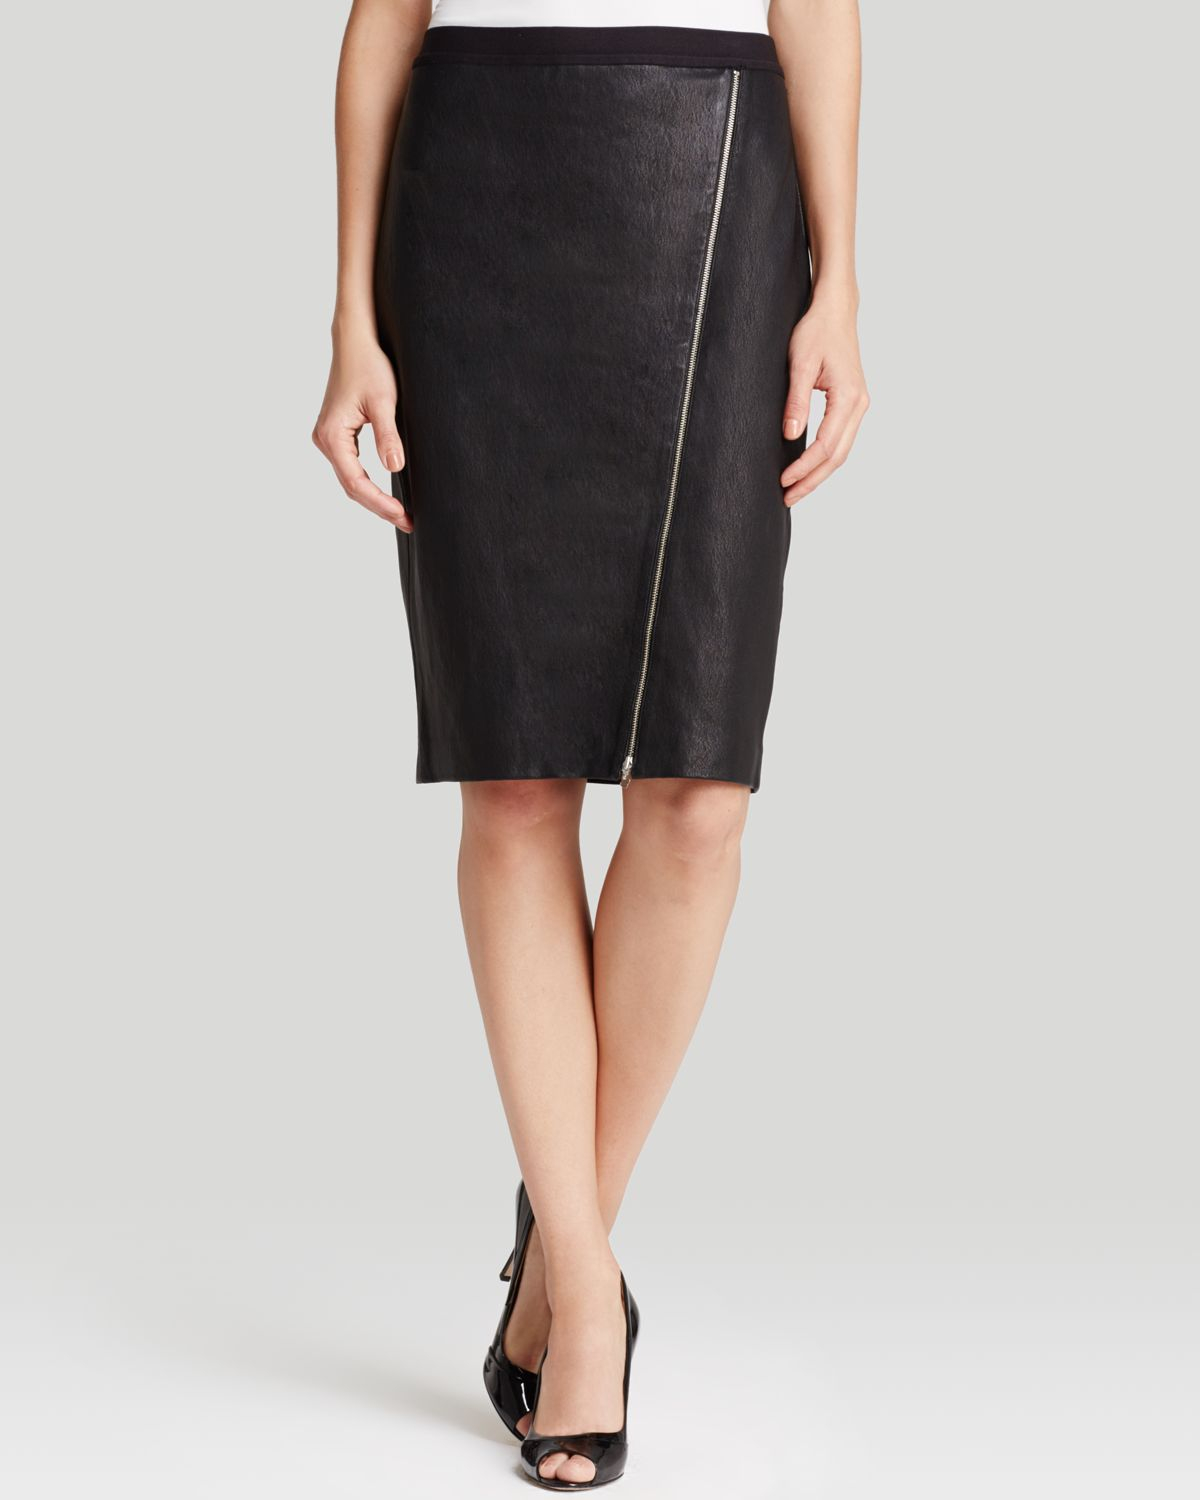 Lyst - Theory Gracey Extension Skirt - Bloomingdale'S Exclusive in Black